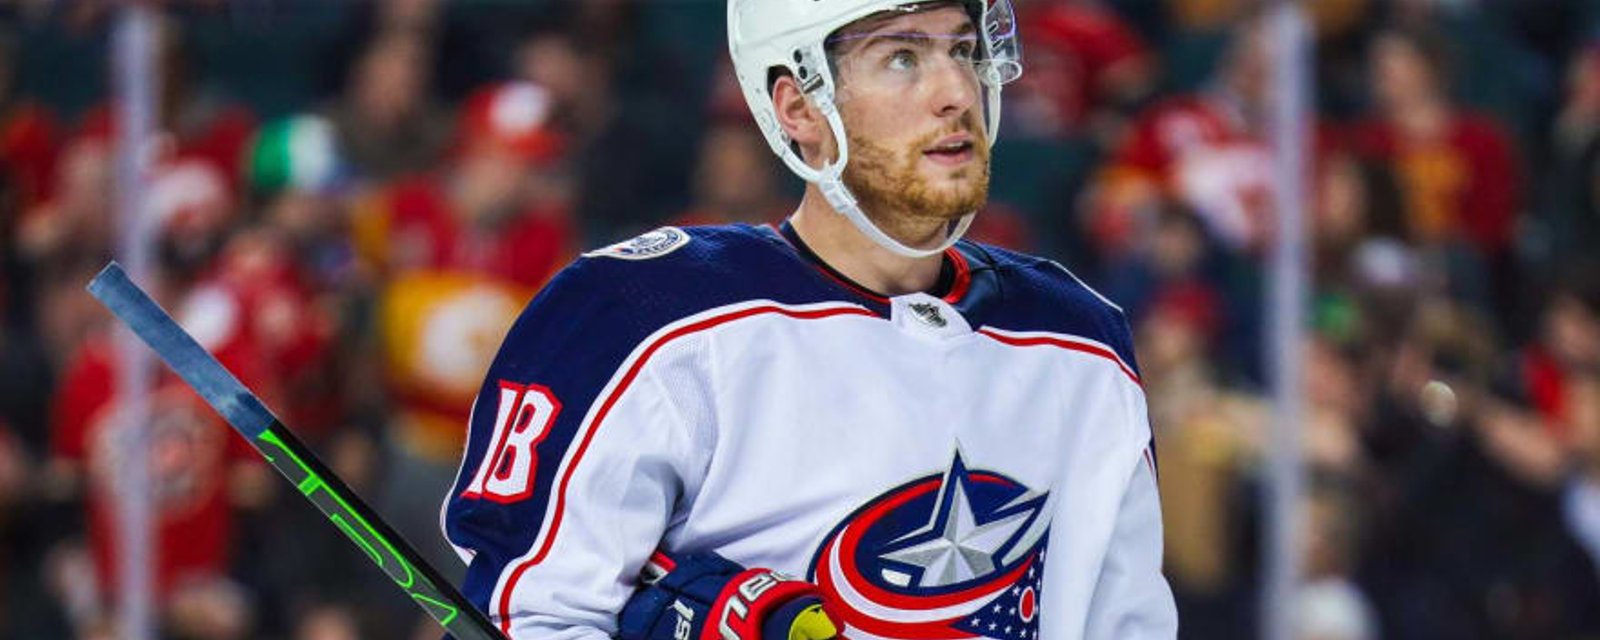 Pierre Luc Dubois sends a message to the Blue Jackets after landing in Winnipeg.